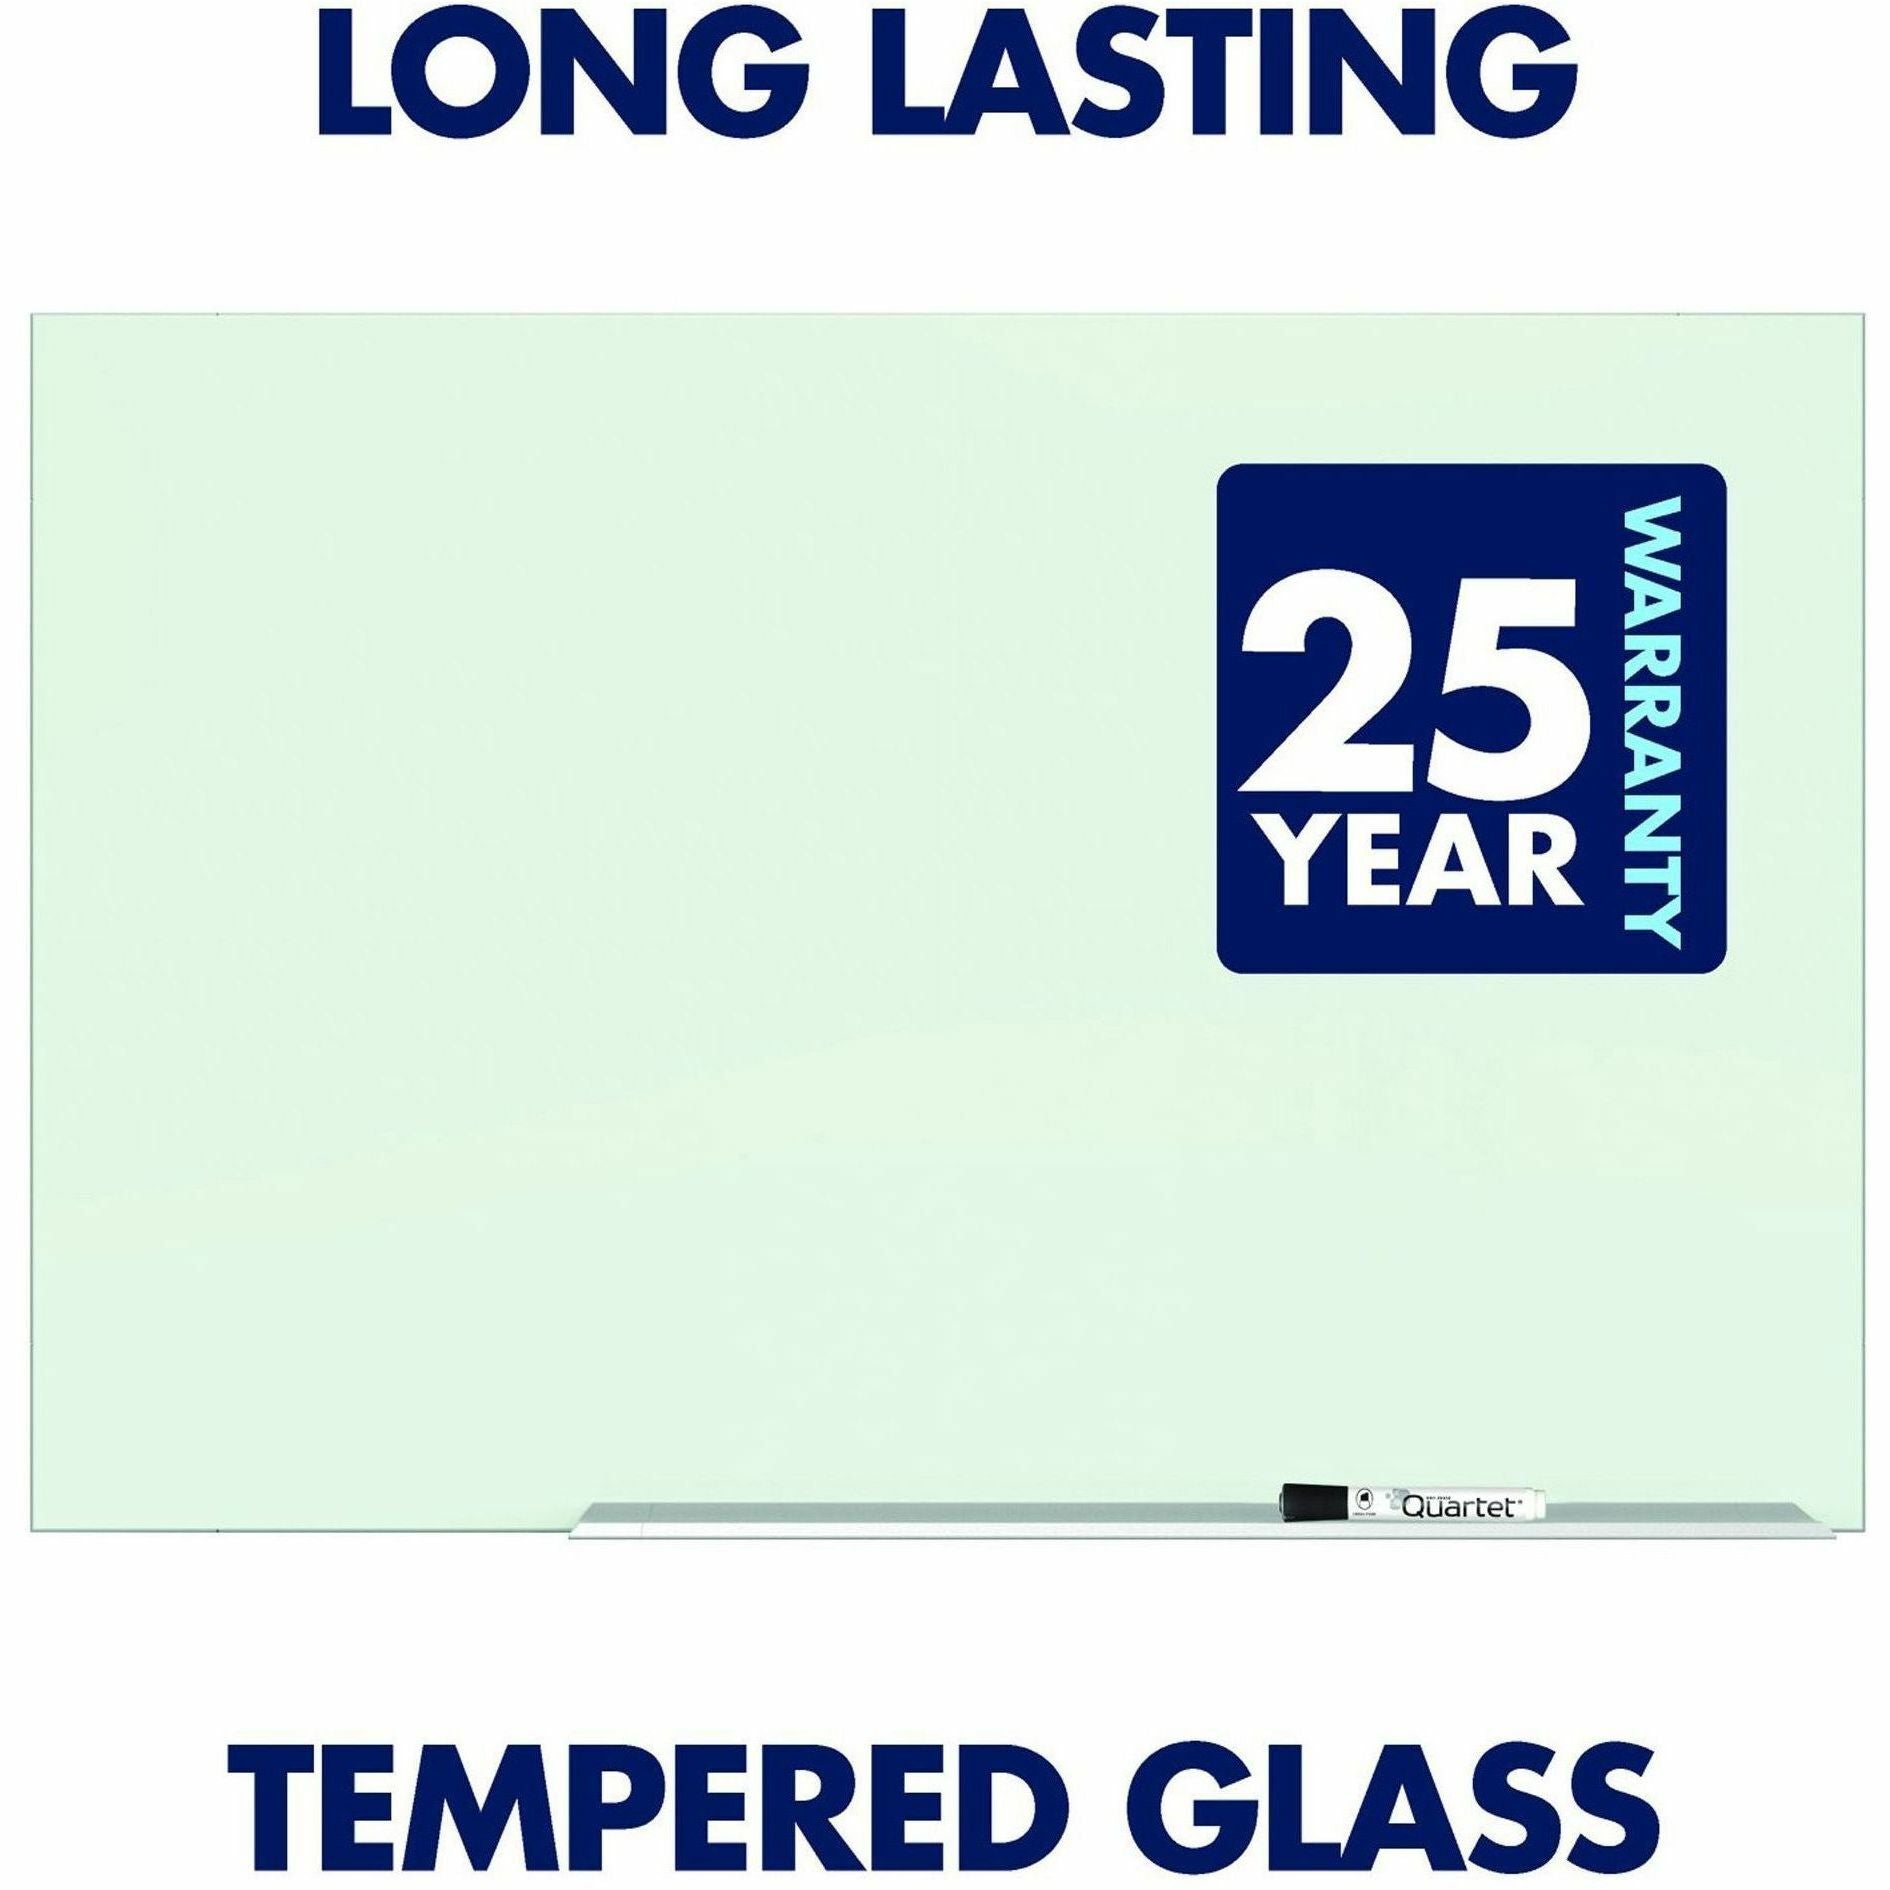 quartet-magnetic-glass-dry-erase-board-36-3-ft-width-x-24-2-ft-height-brilliance-white-tempered-glass-surface-rectangle-horizontal-vertical-magnetic-1-each_qrtg23624w - 2